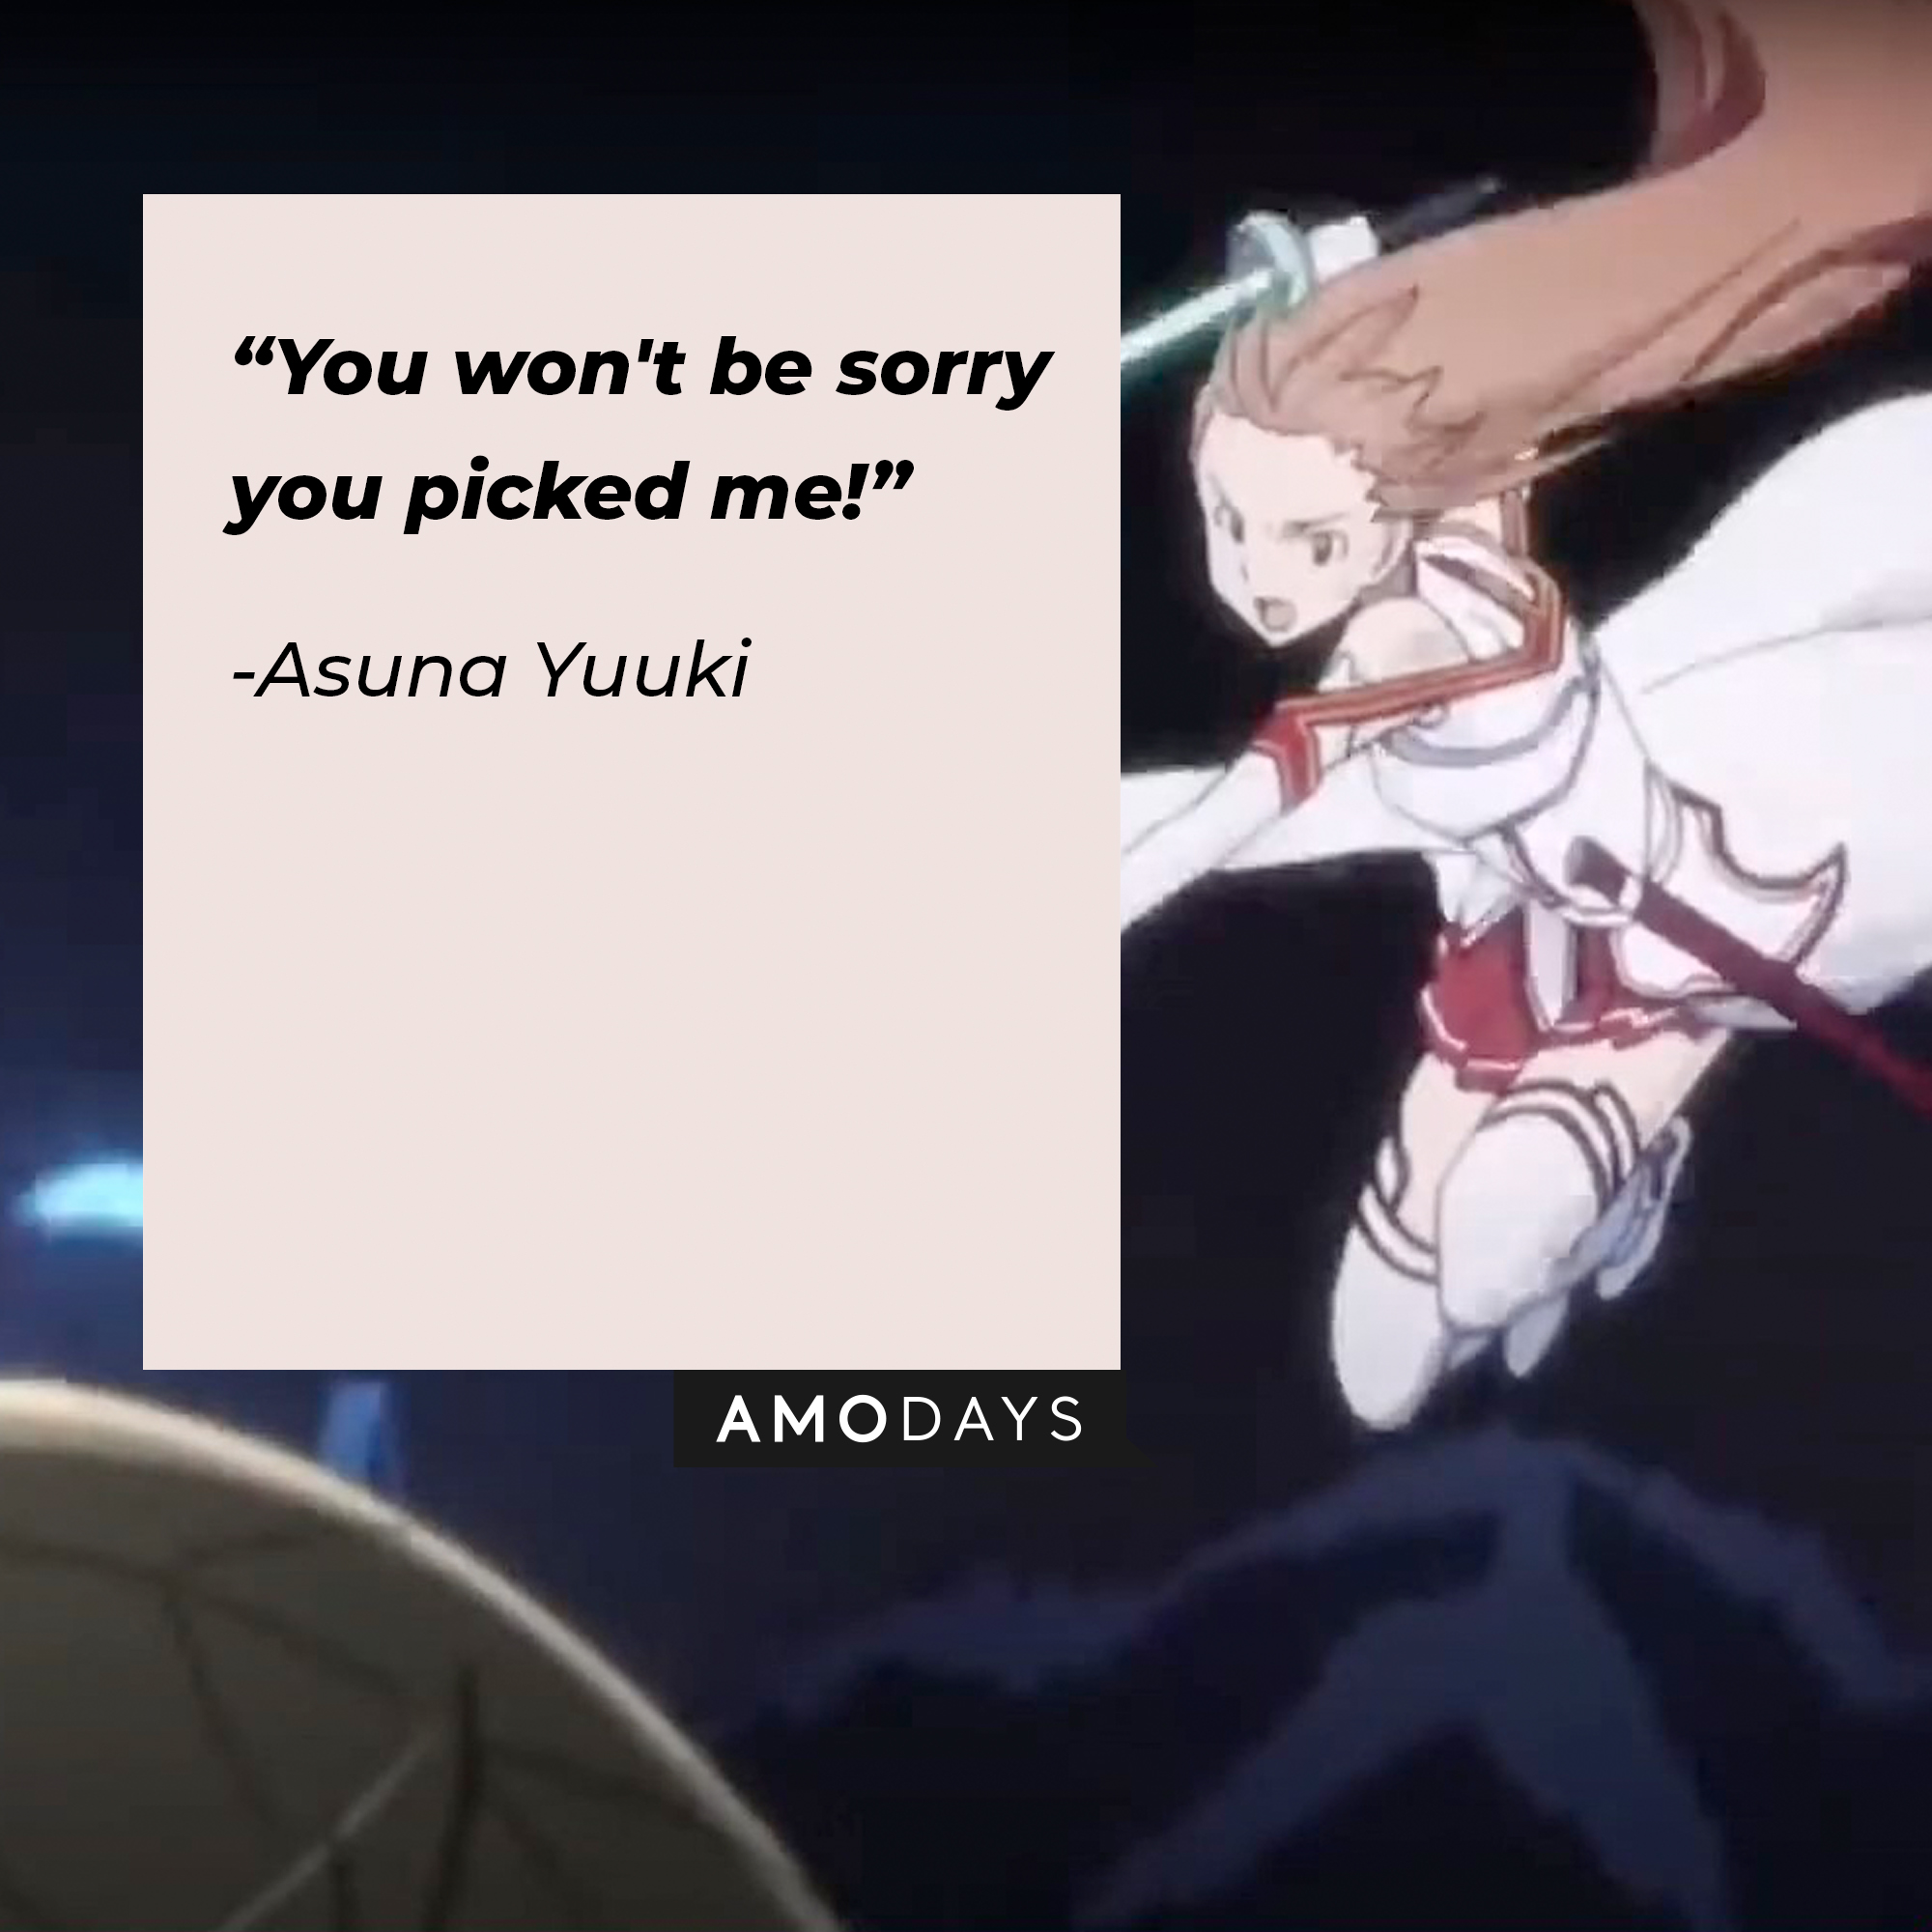 A picture of Asuna Yuuki with her quote: “You won't be sorry you picked me!” | Source: facebook.com/SwordArtOnlineUSA